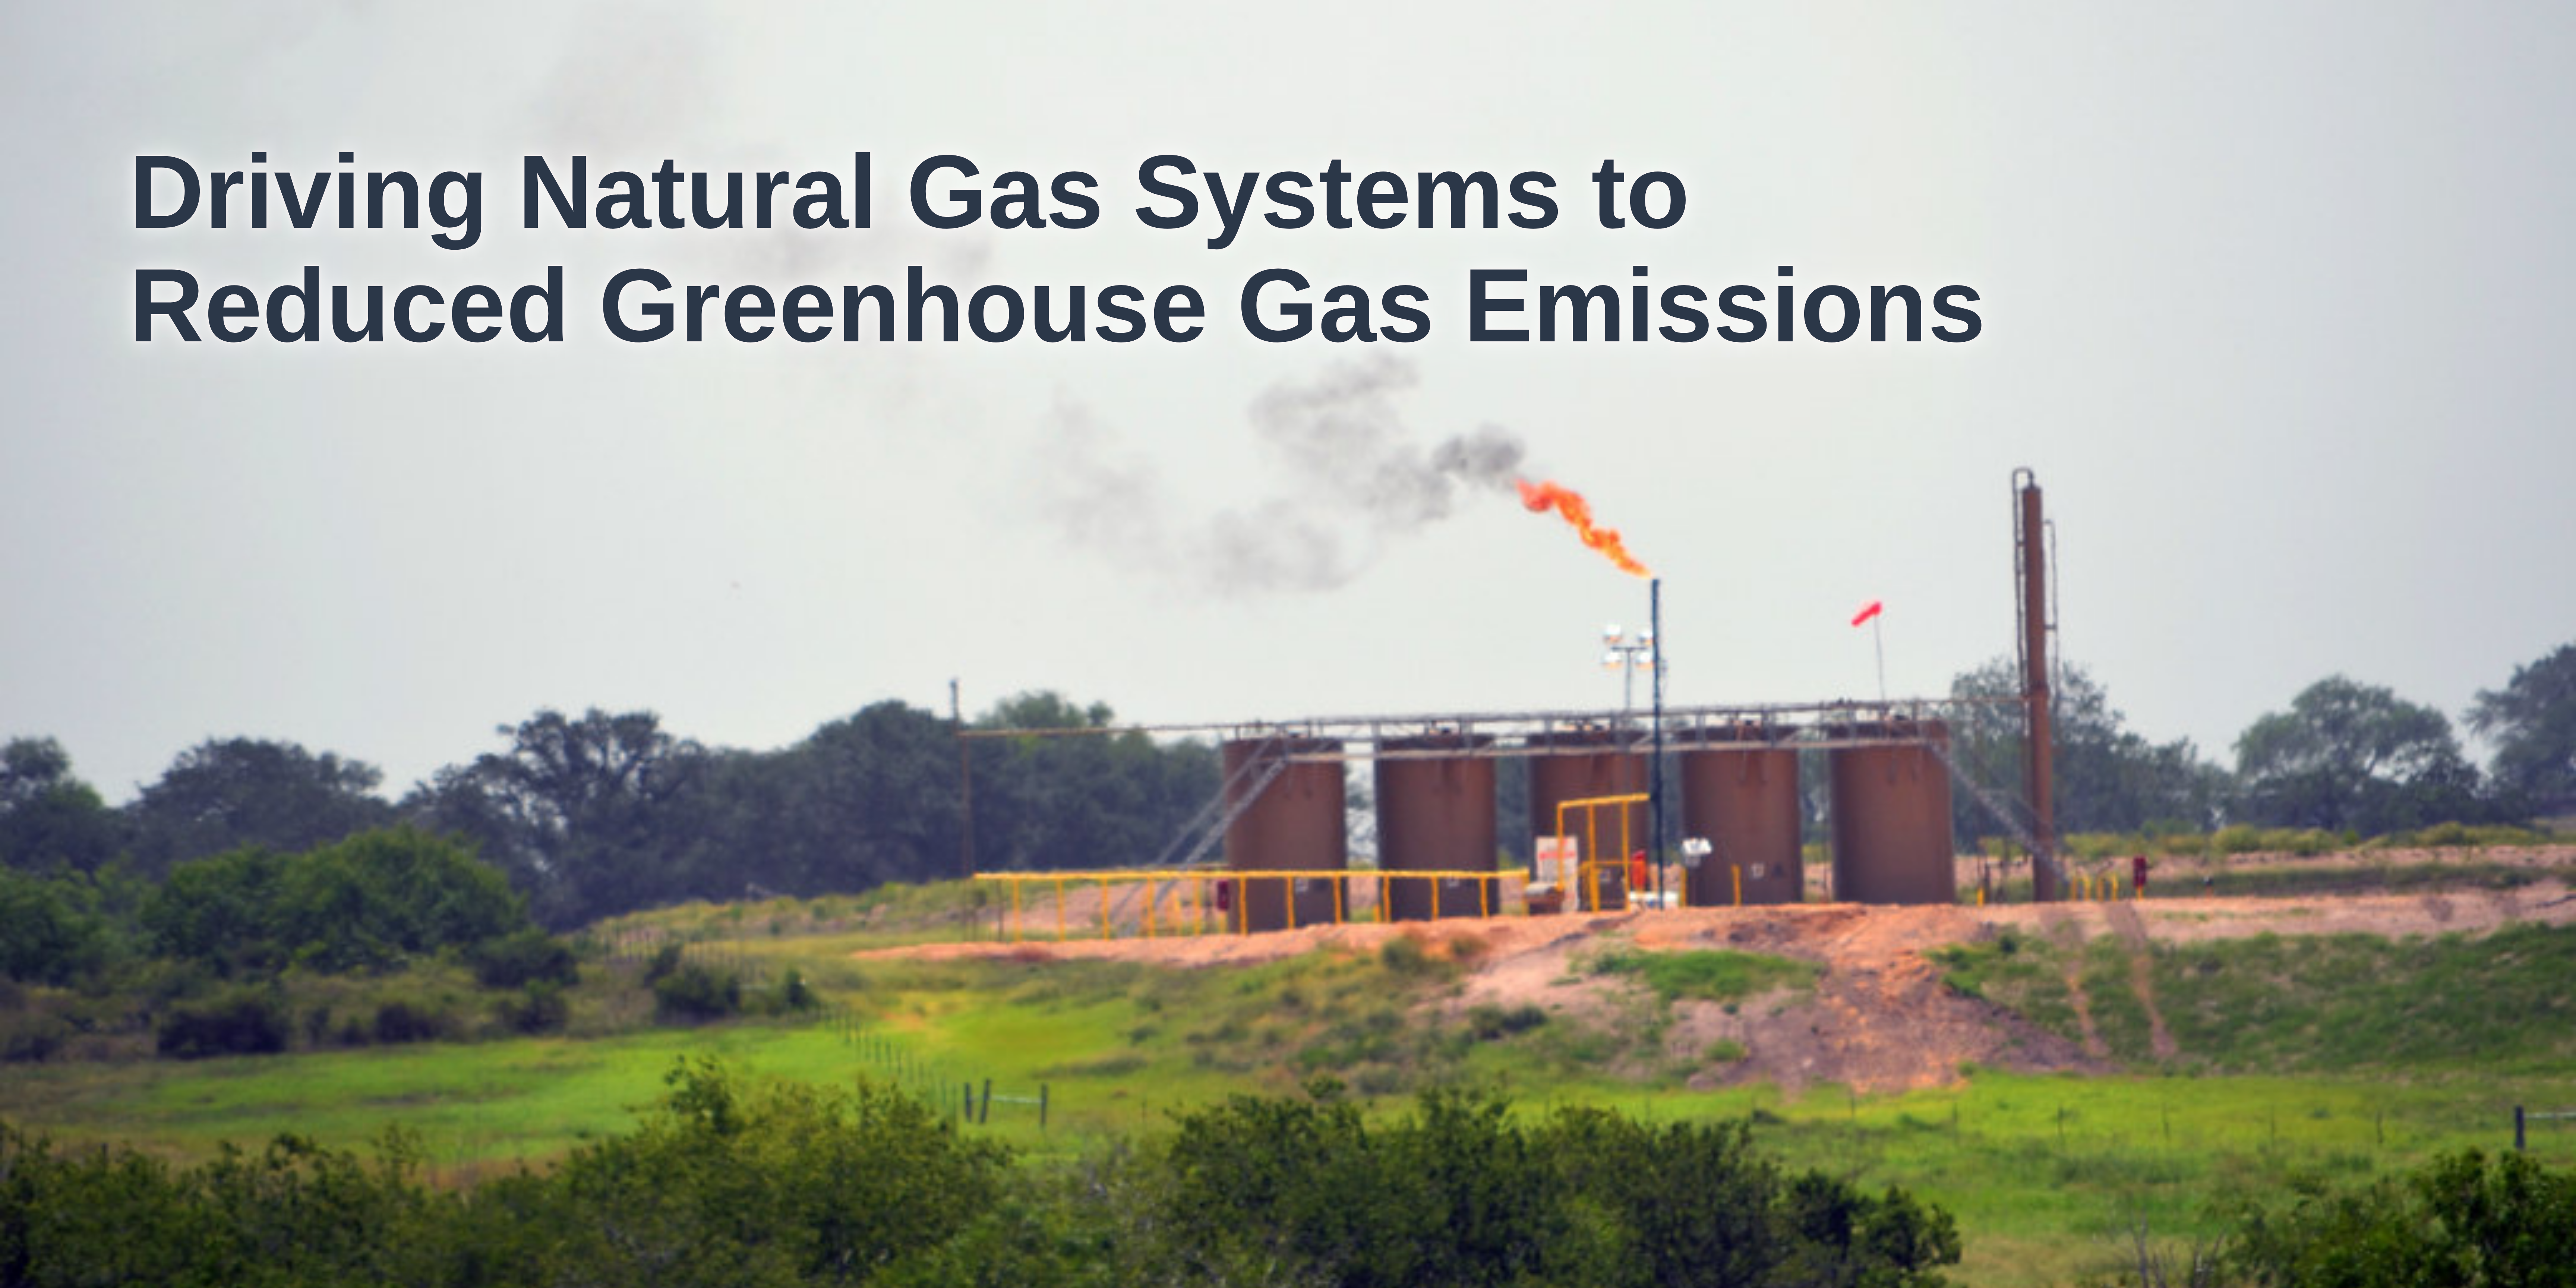 Driving Natural Gas Systems to Reduced Greenhouse Gas Emissions